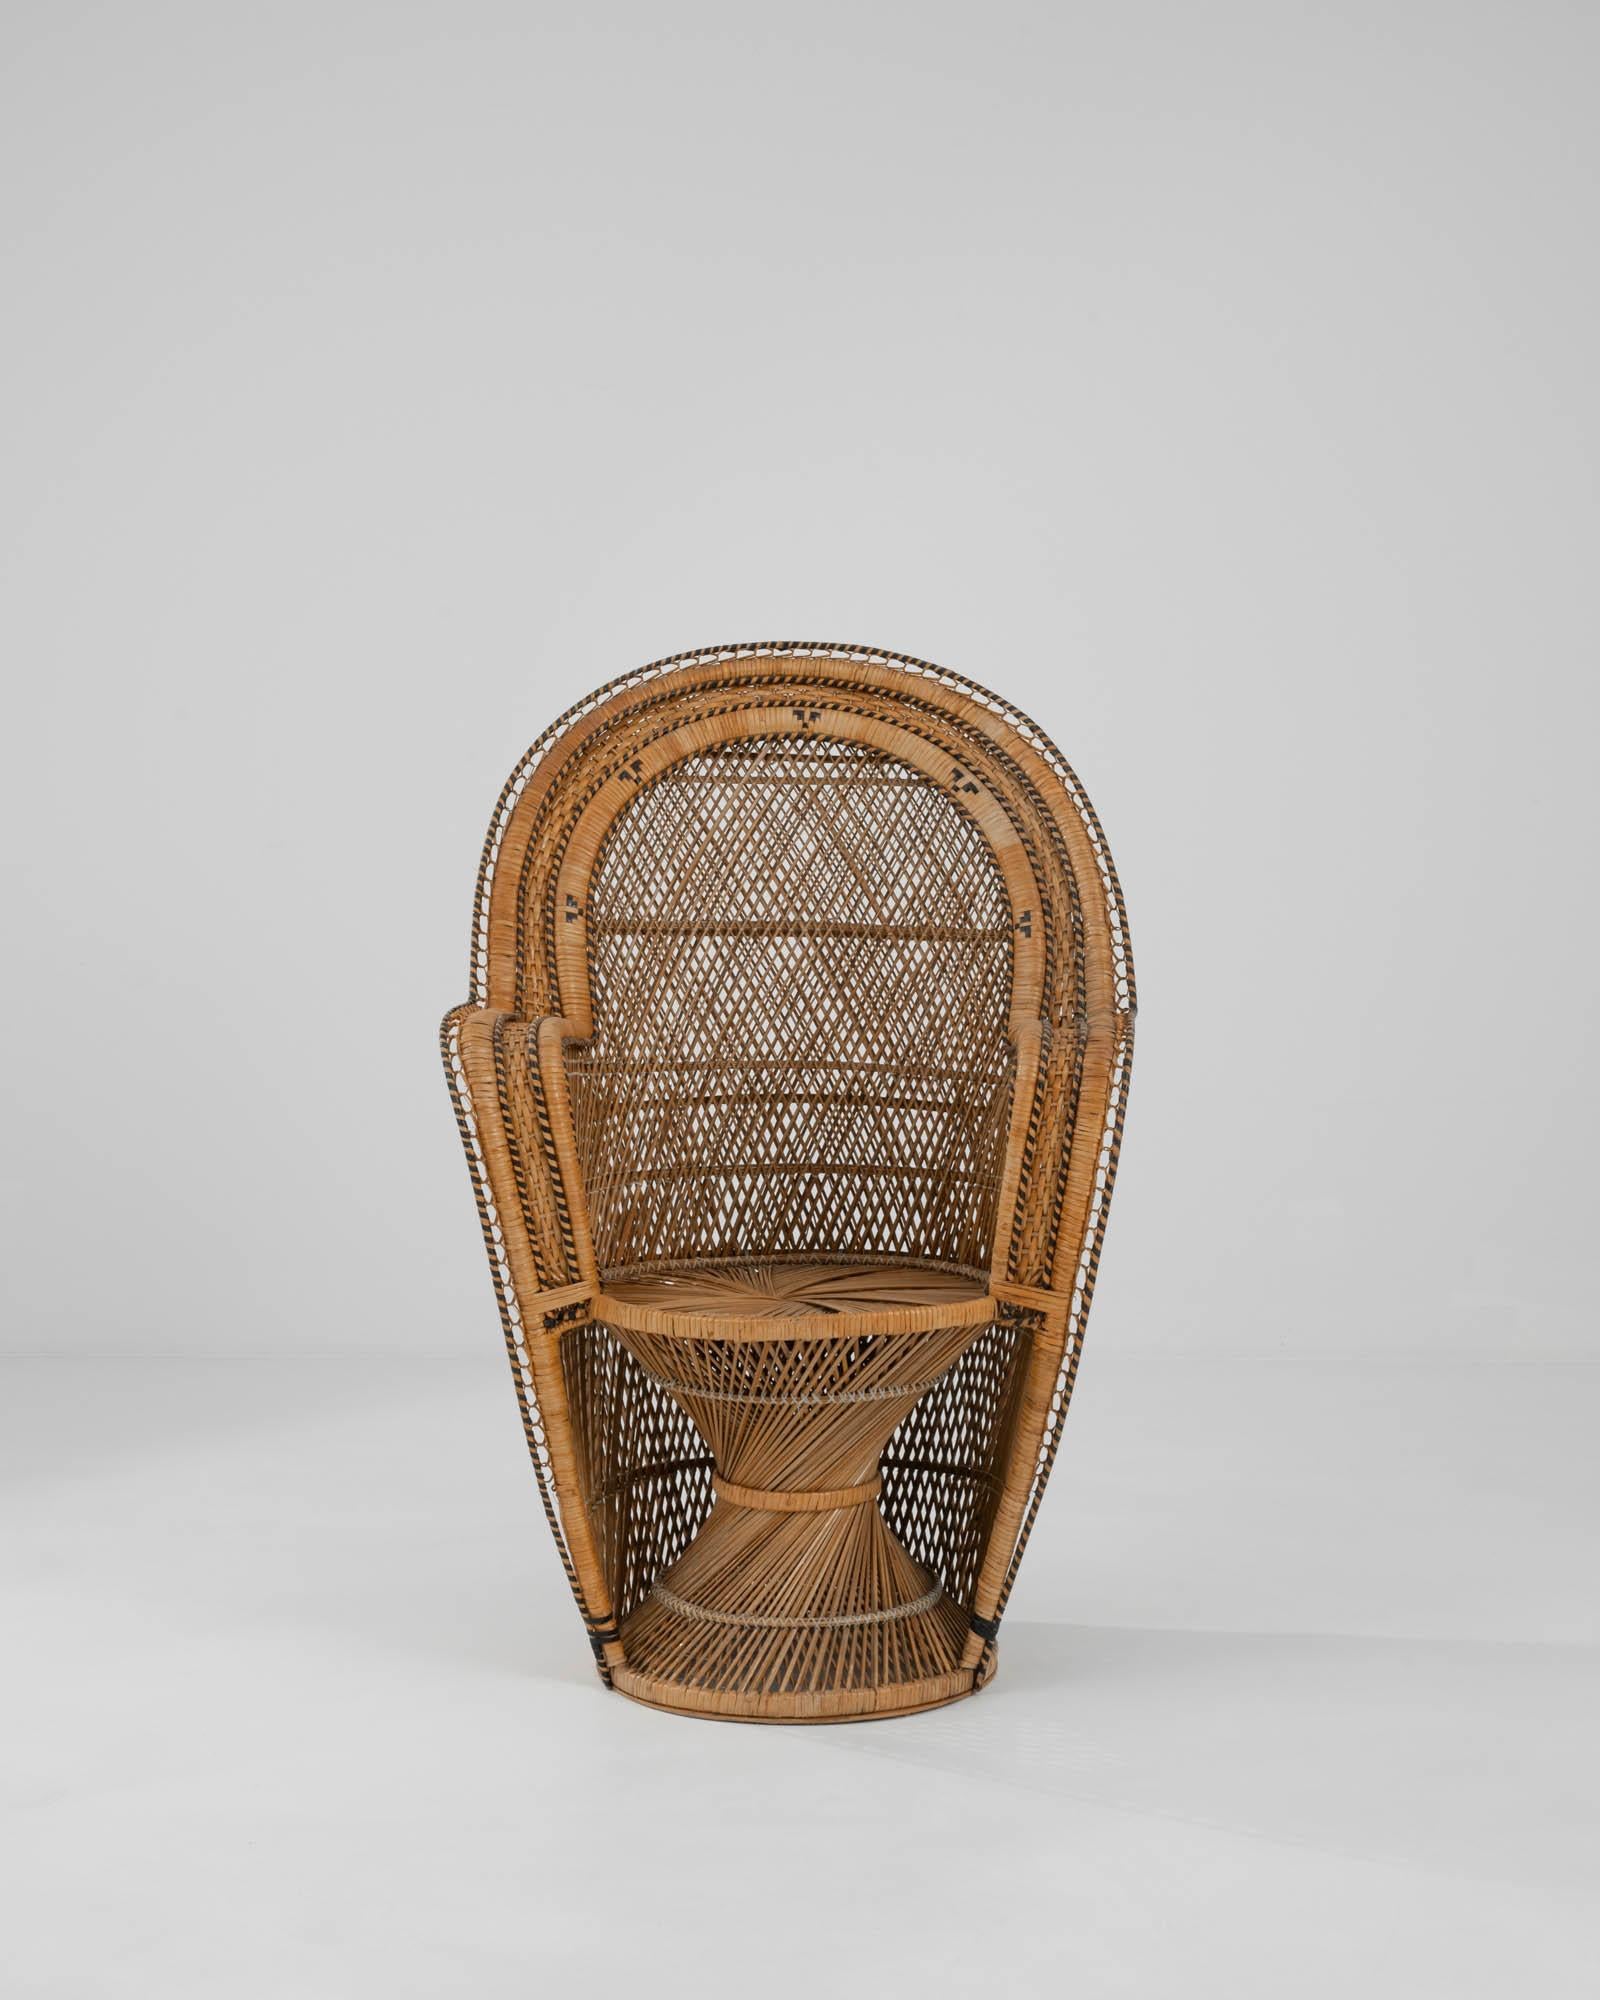 In typical mid-20th century rattan fashion, an “Emmanuelle” style armchair from circa 1960. This throne-like chair has an iconic shape, with black striped ornament and a large oval back. The swirling rattan seat and base grounds the piece while